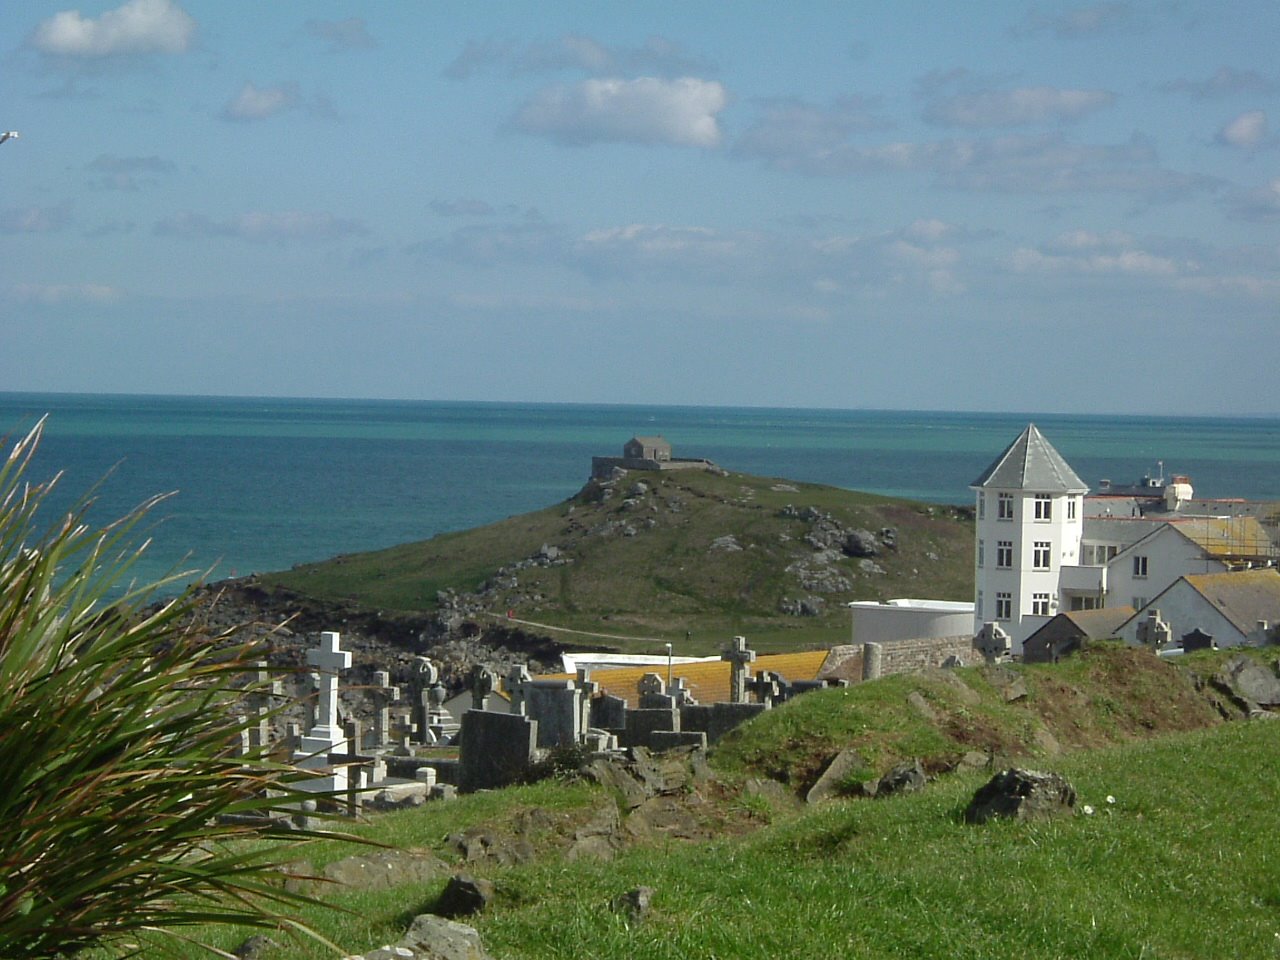 [holiday+in+st+ives+066.jpg]